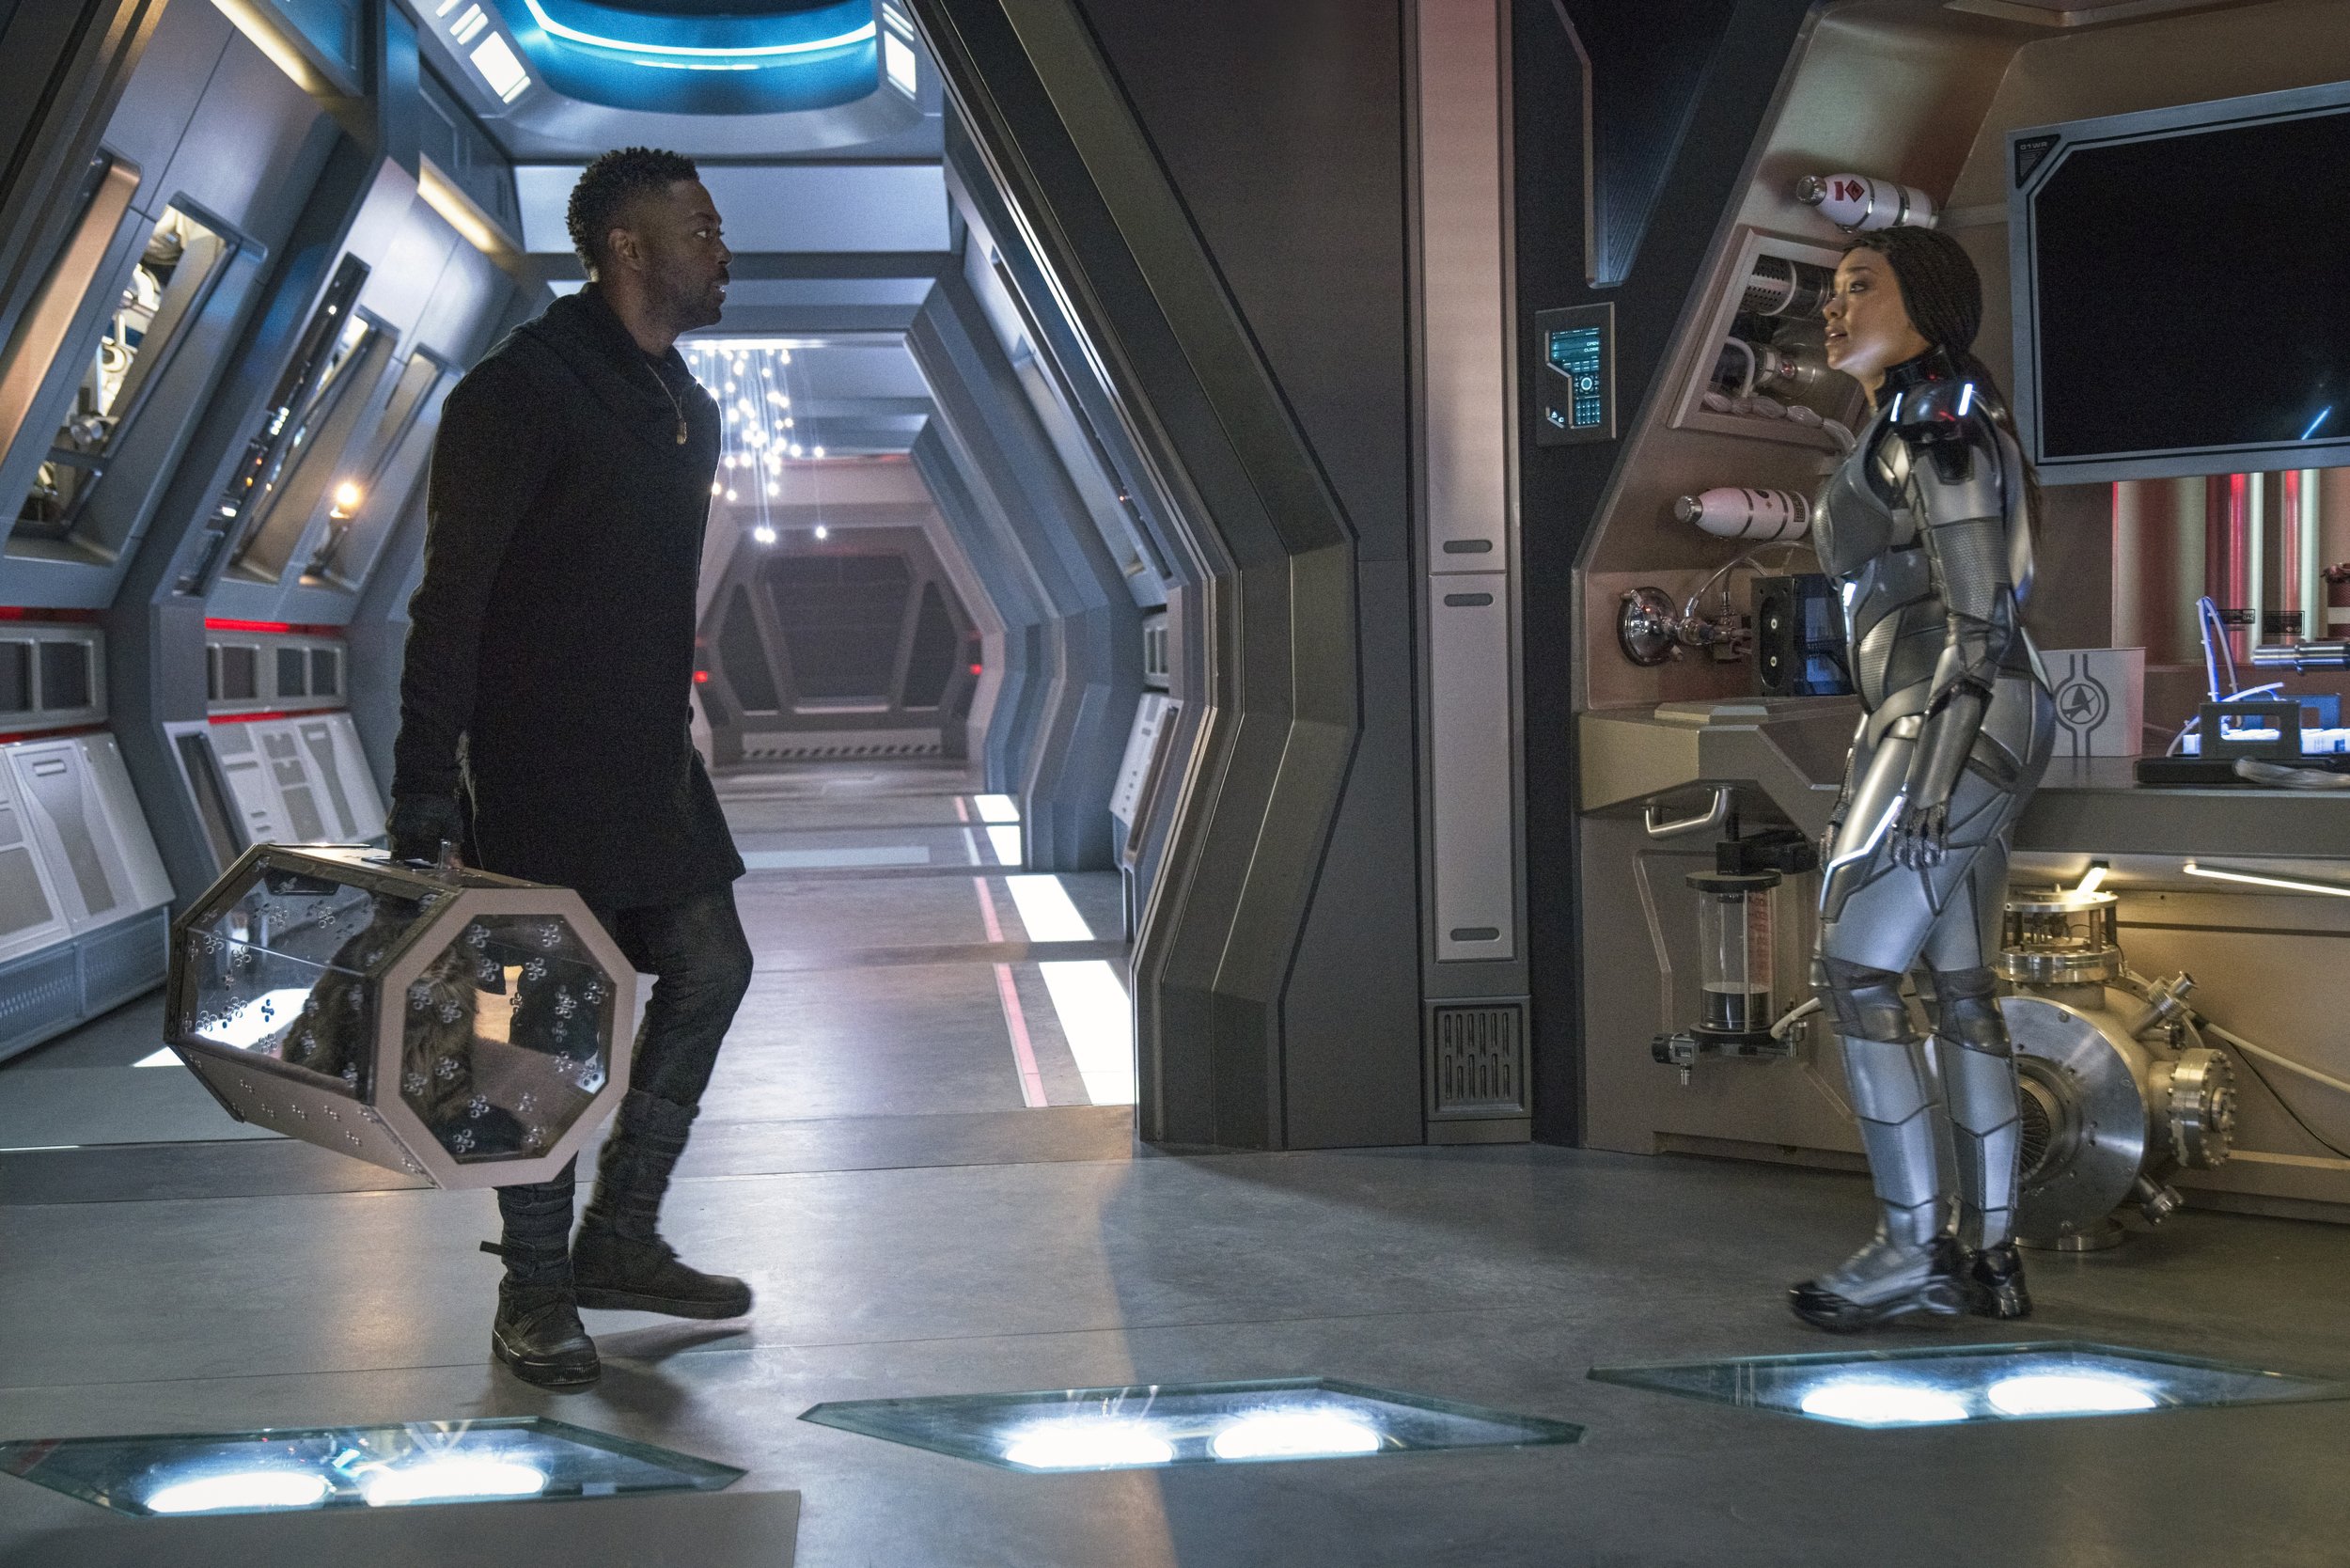   Pictured: David Ajala as Book, Grudge the cat and Sonequa Martin Green as Burnham of the Paramount+ original series STAR TREK: DISCOVERY. Photo Cr: Michael Gibson/Paramount+ (C) 2021 CBS Interactive. All Rights Reserved.  